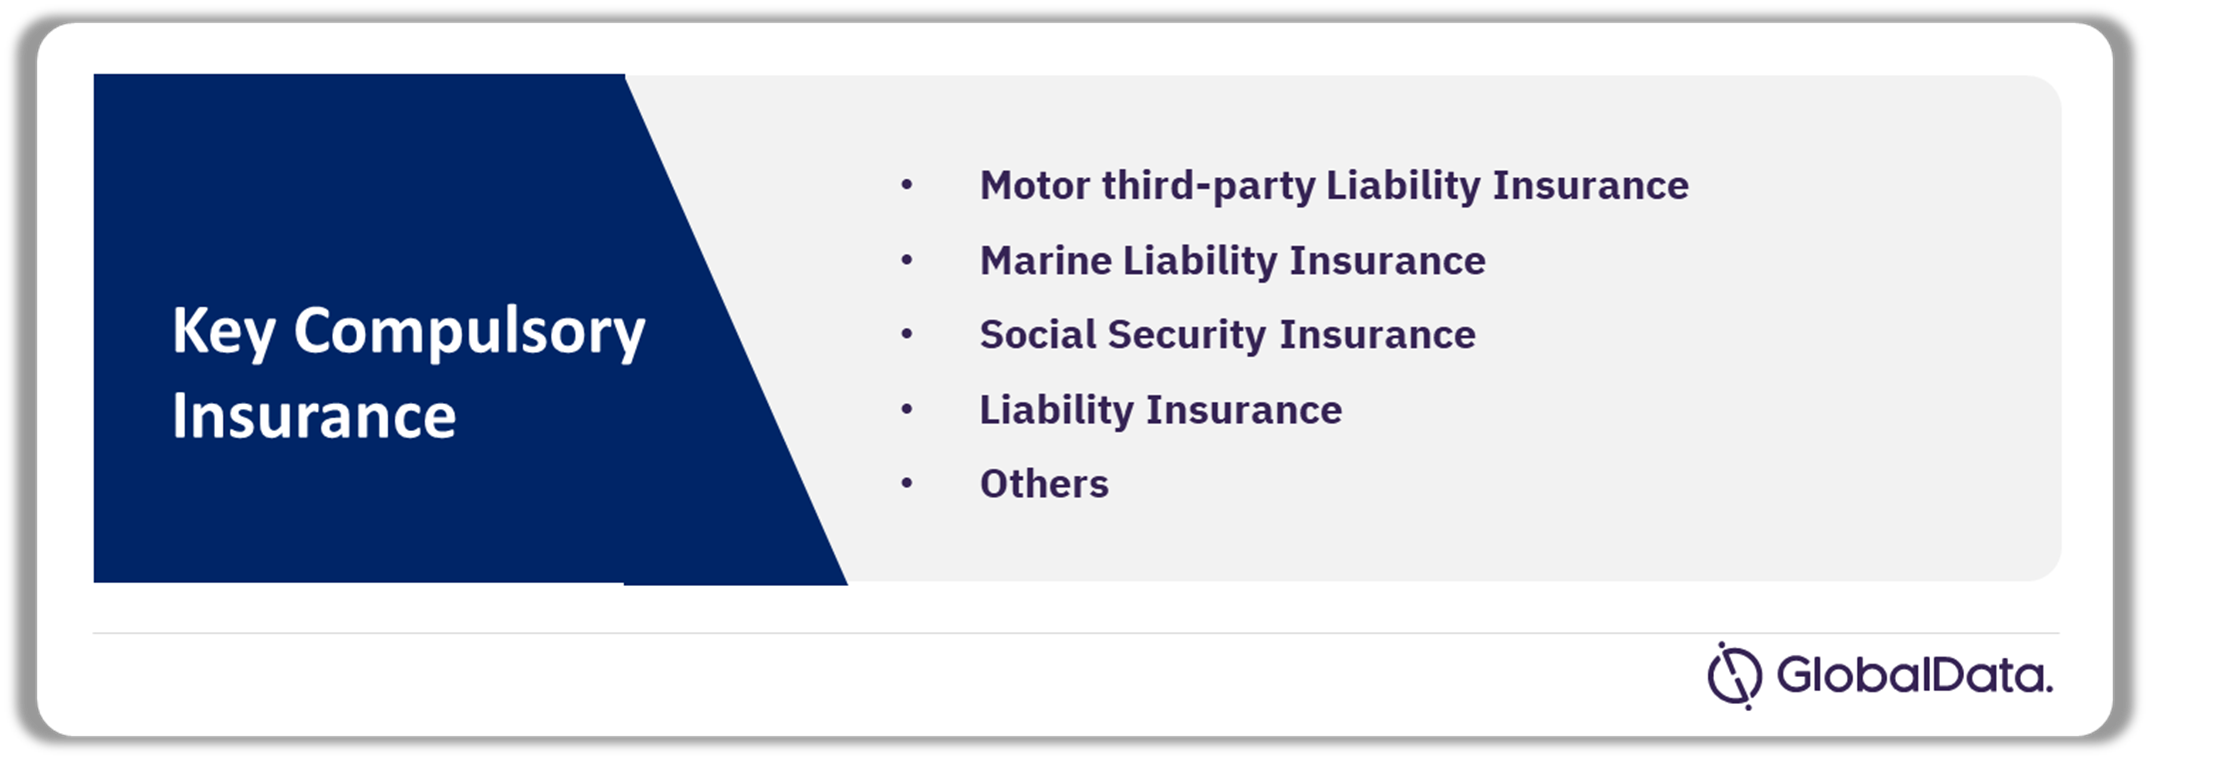 Lithuania Insurance Industry Analysis by Compulsory Insurances